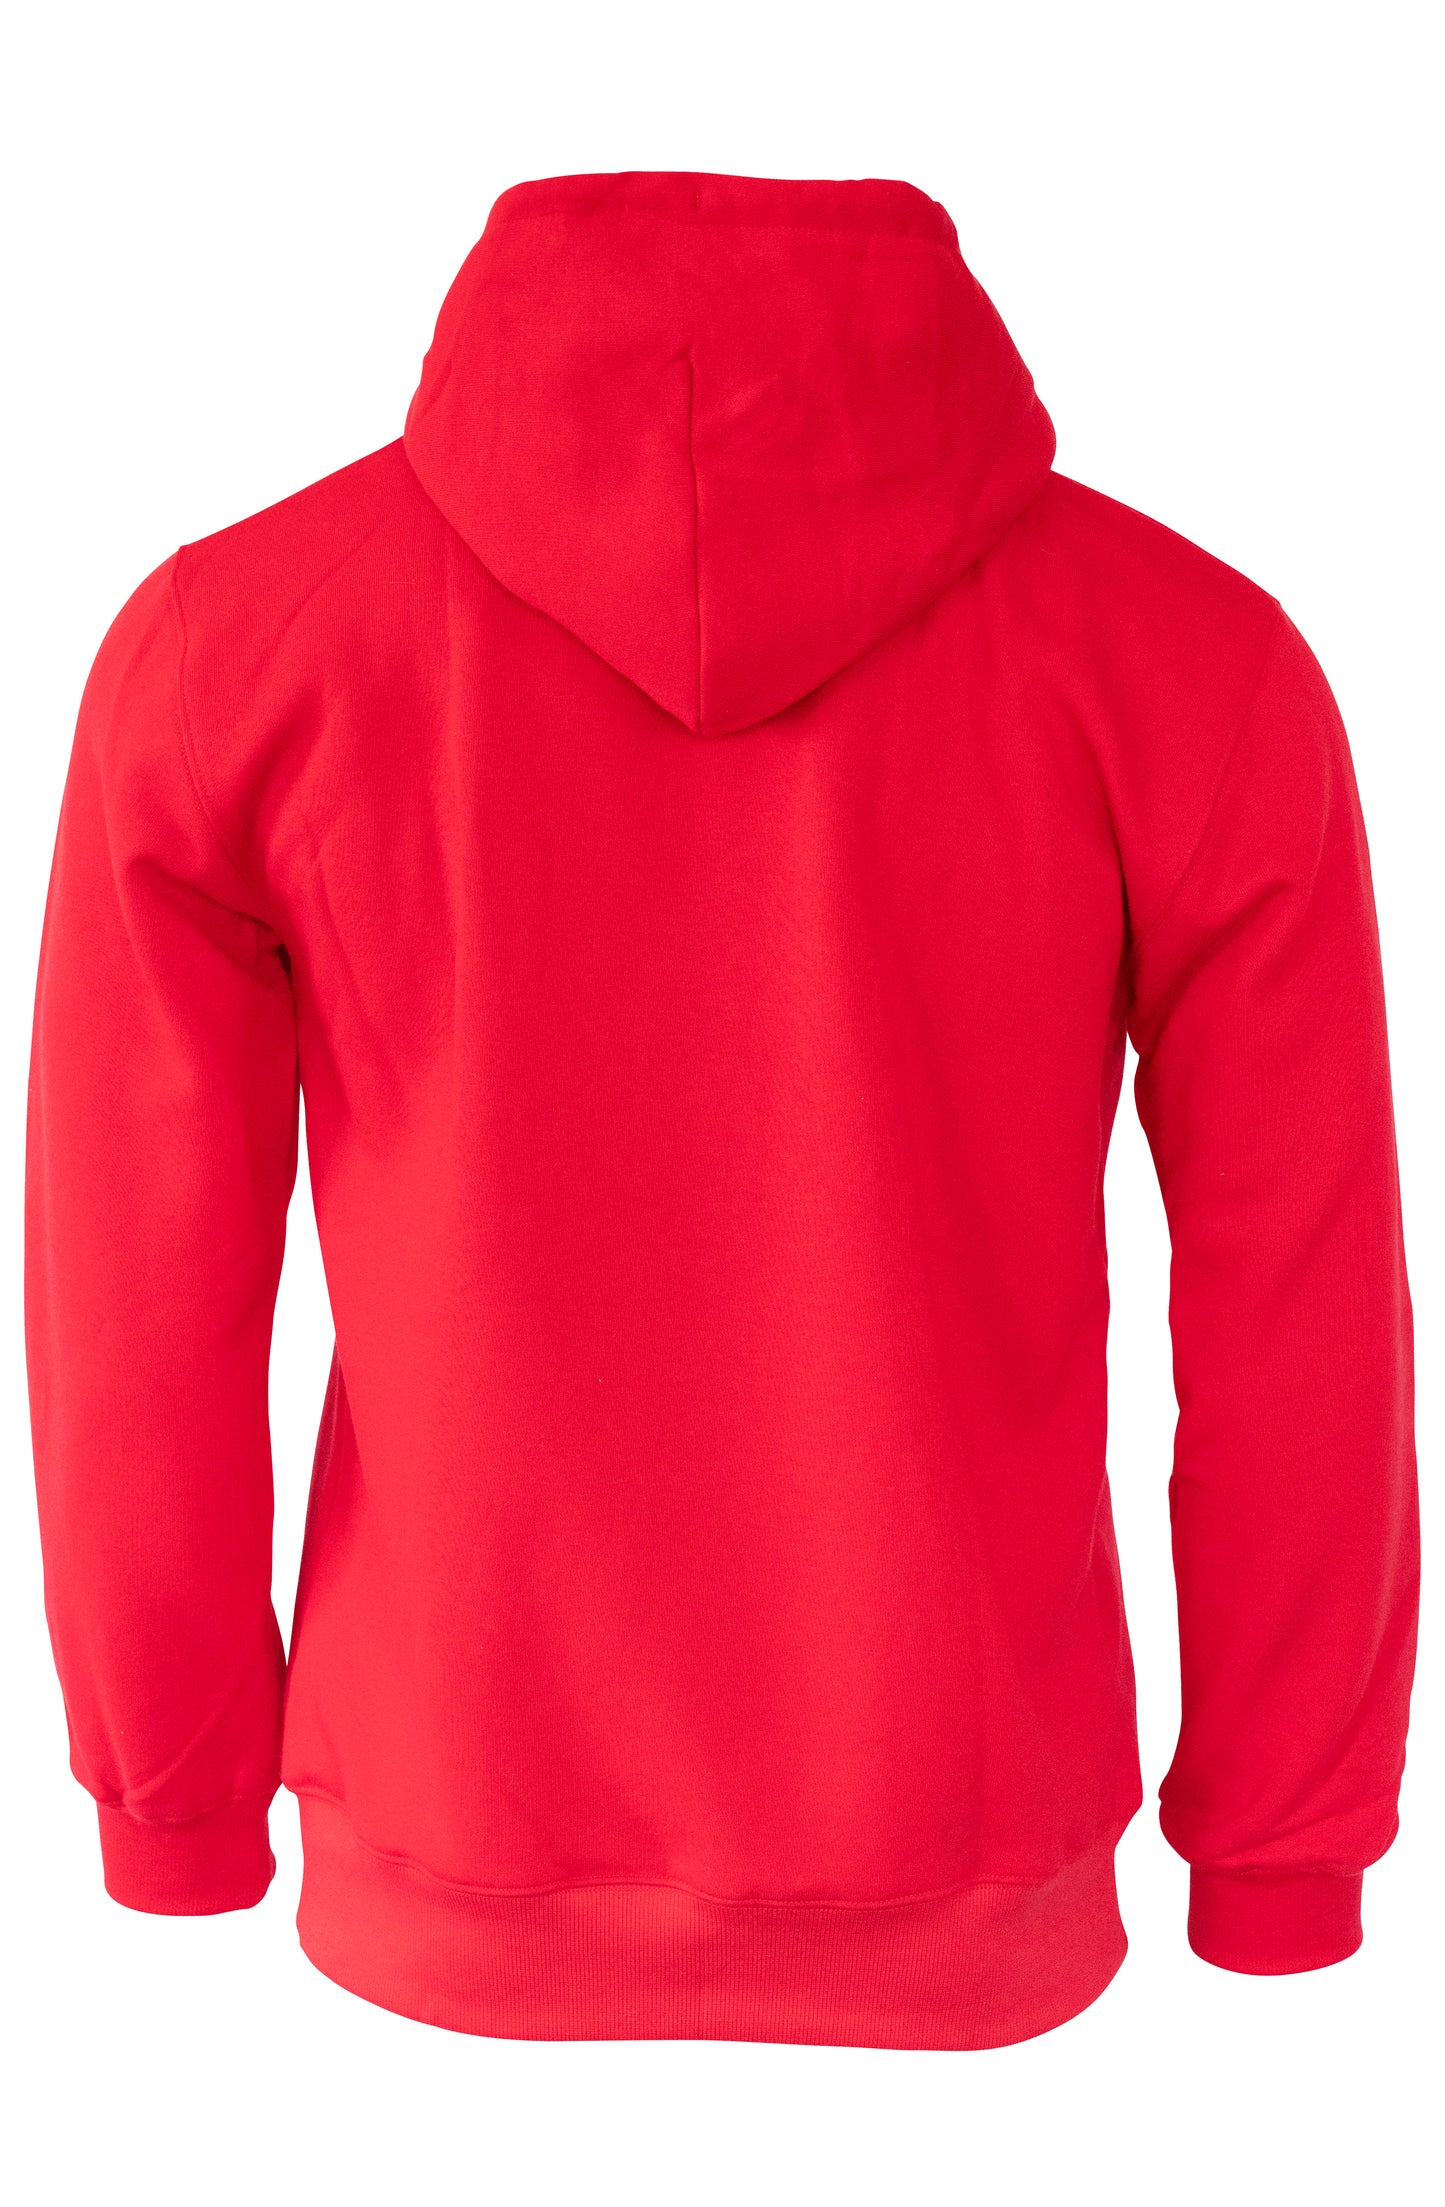 ICONIC HOODIE | RED